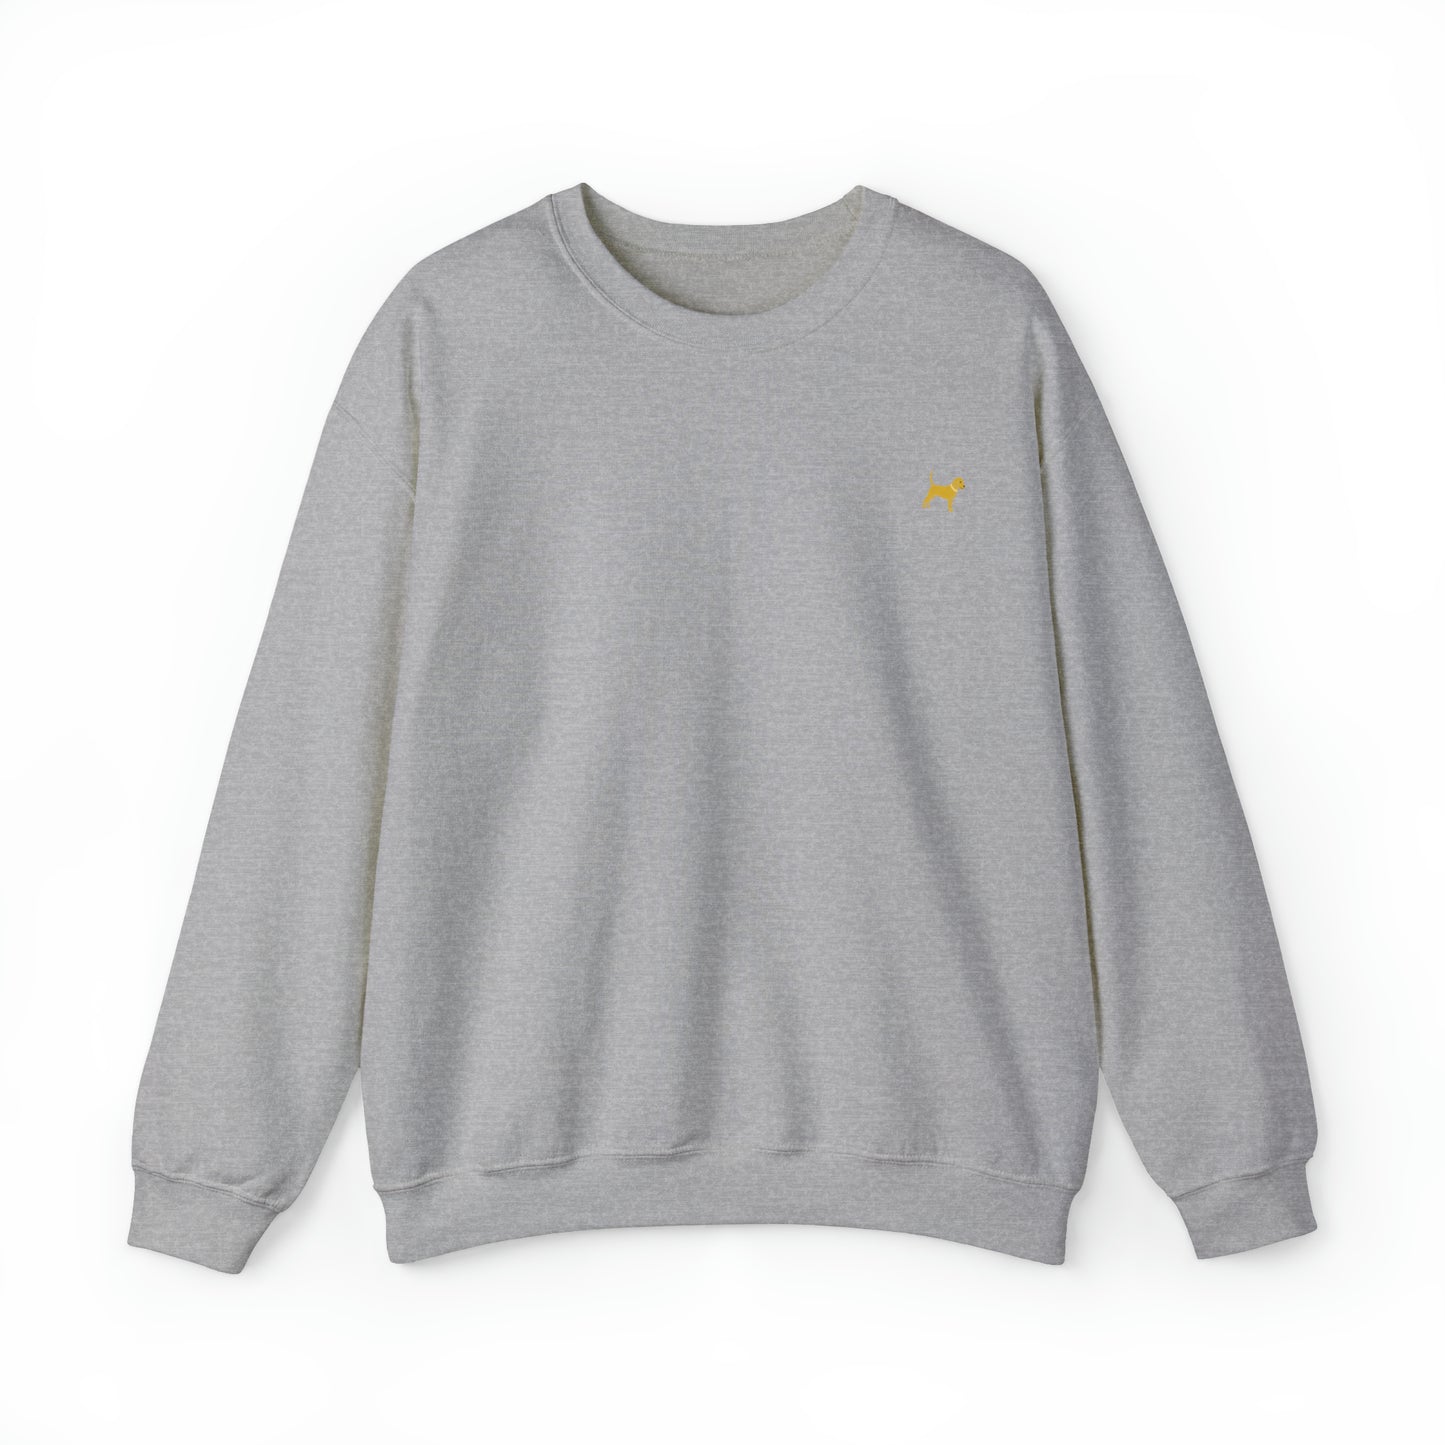 Little Yellow Dog Crewneck with Script